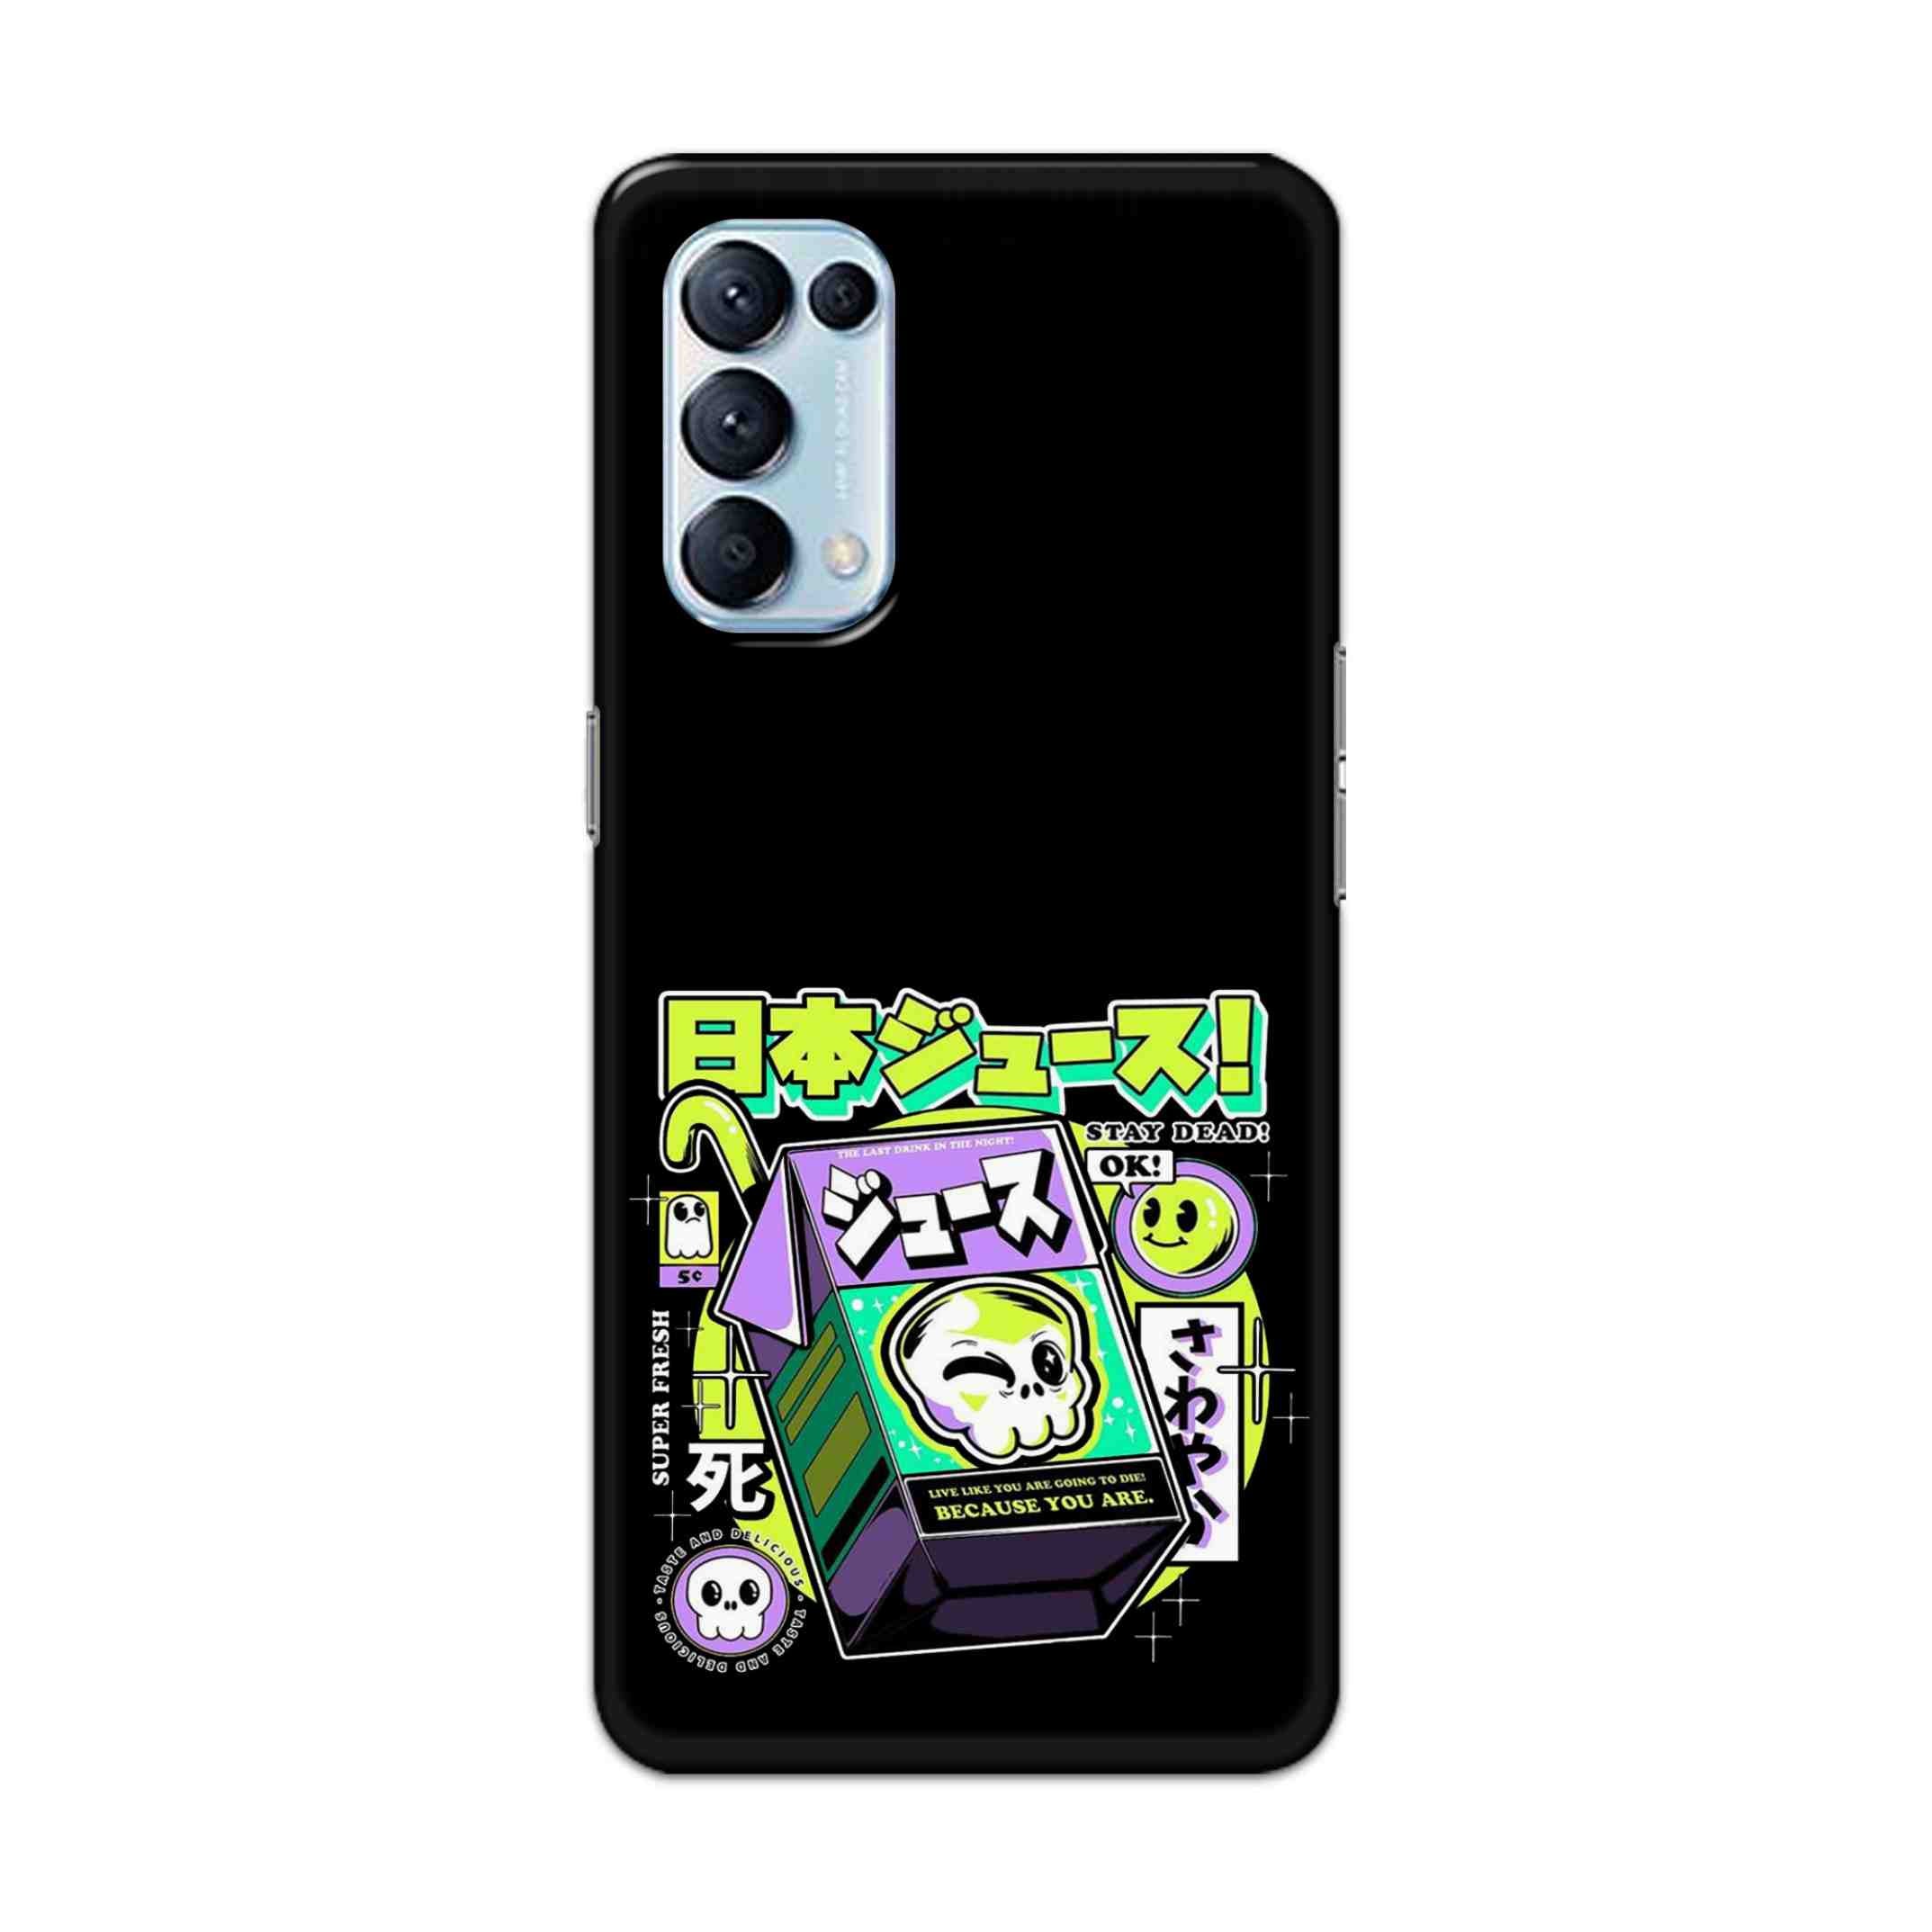 Buy Because You Are Hard Back Mobile Phone Case Cover For Oppo Reno 5 Pro 5G Online